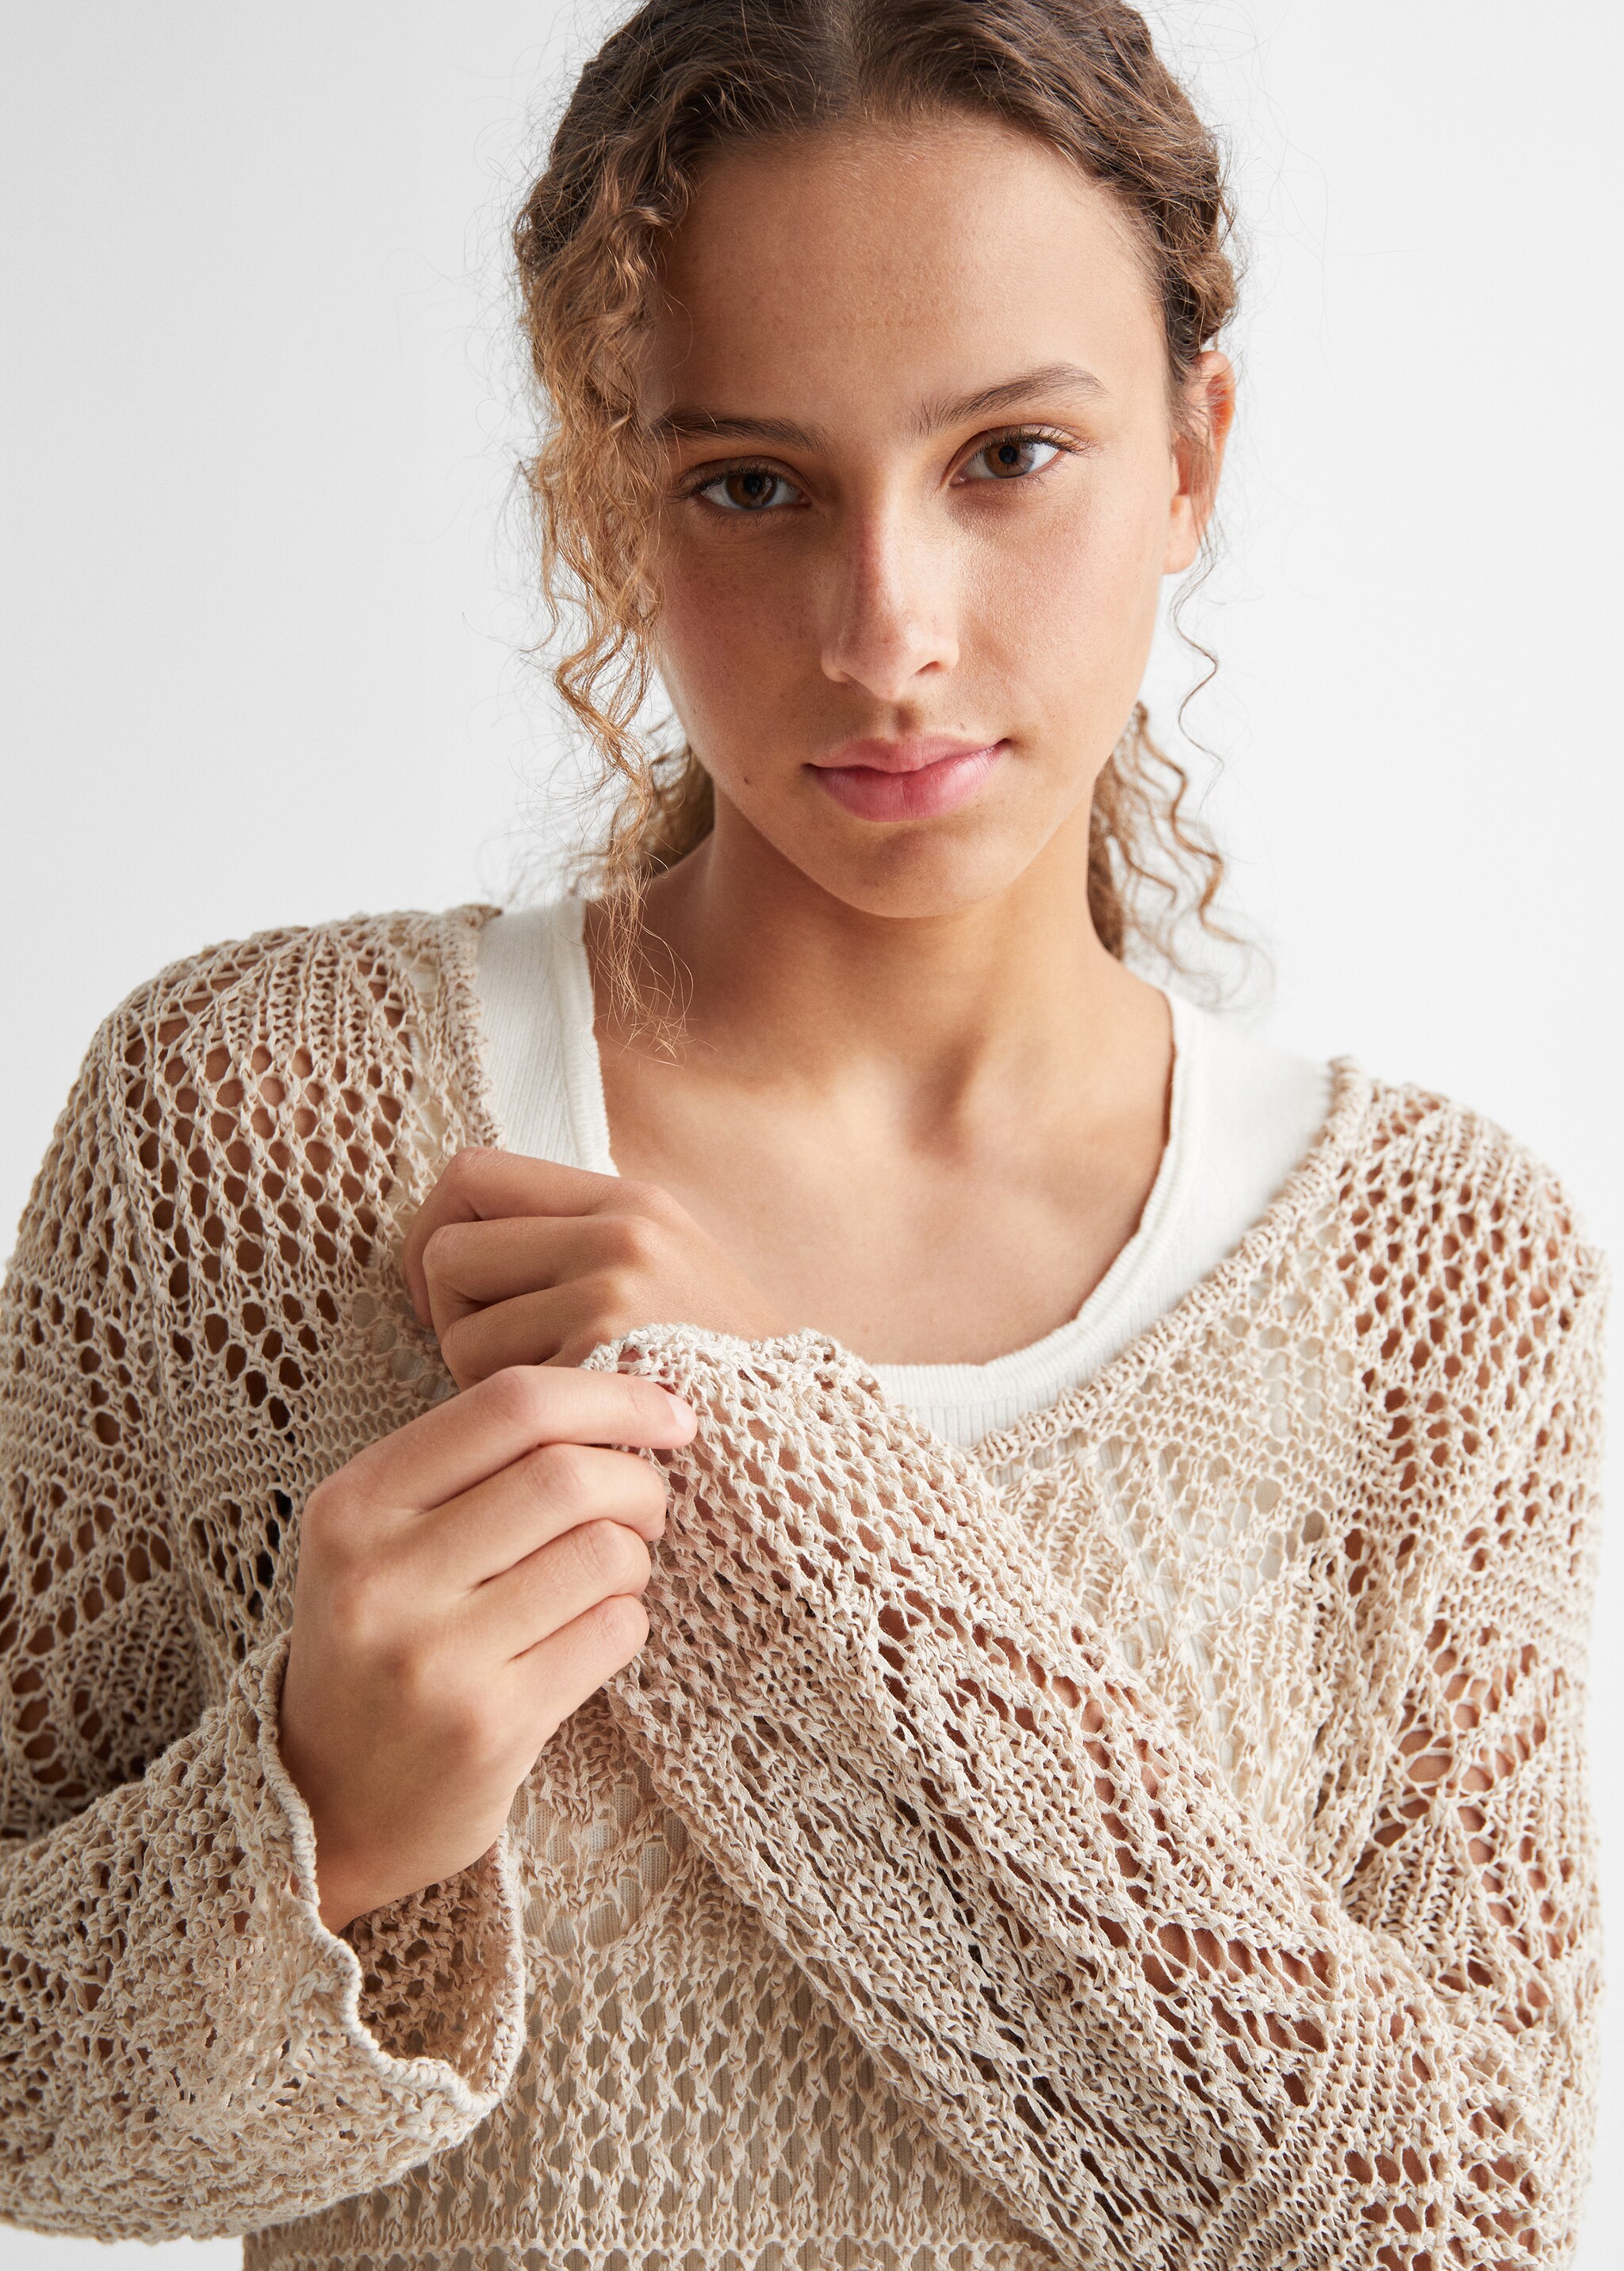 Openwork knit sweater - Details of the article 1